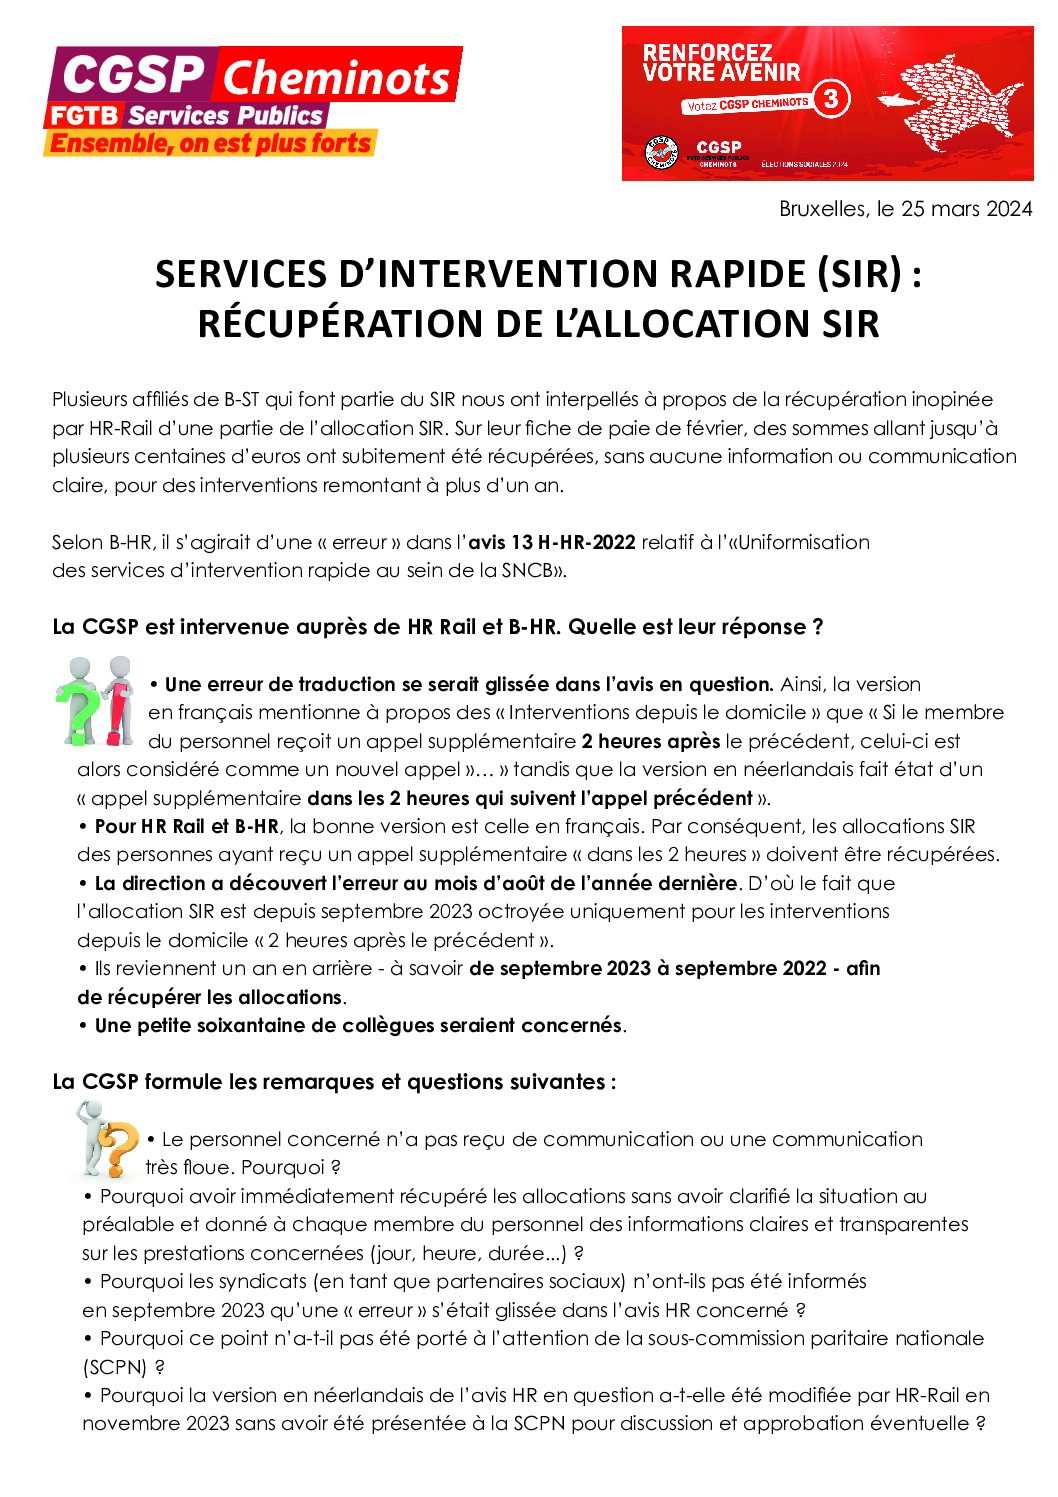 SERVICES D’INTERVENTION RAPIDE (SIR)